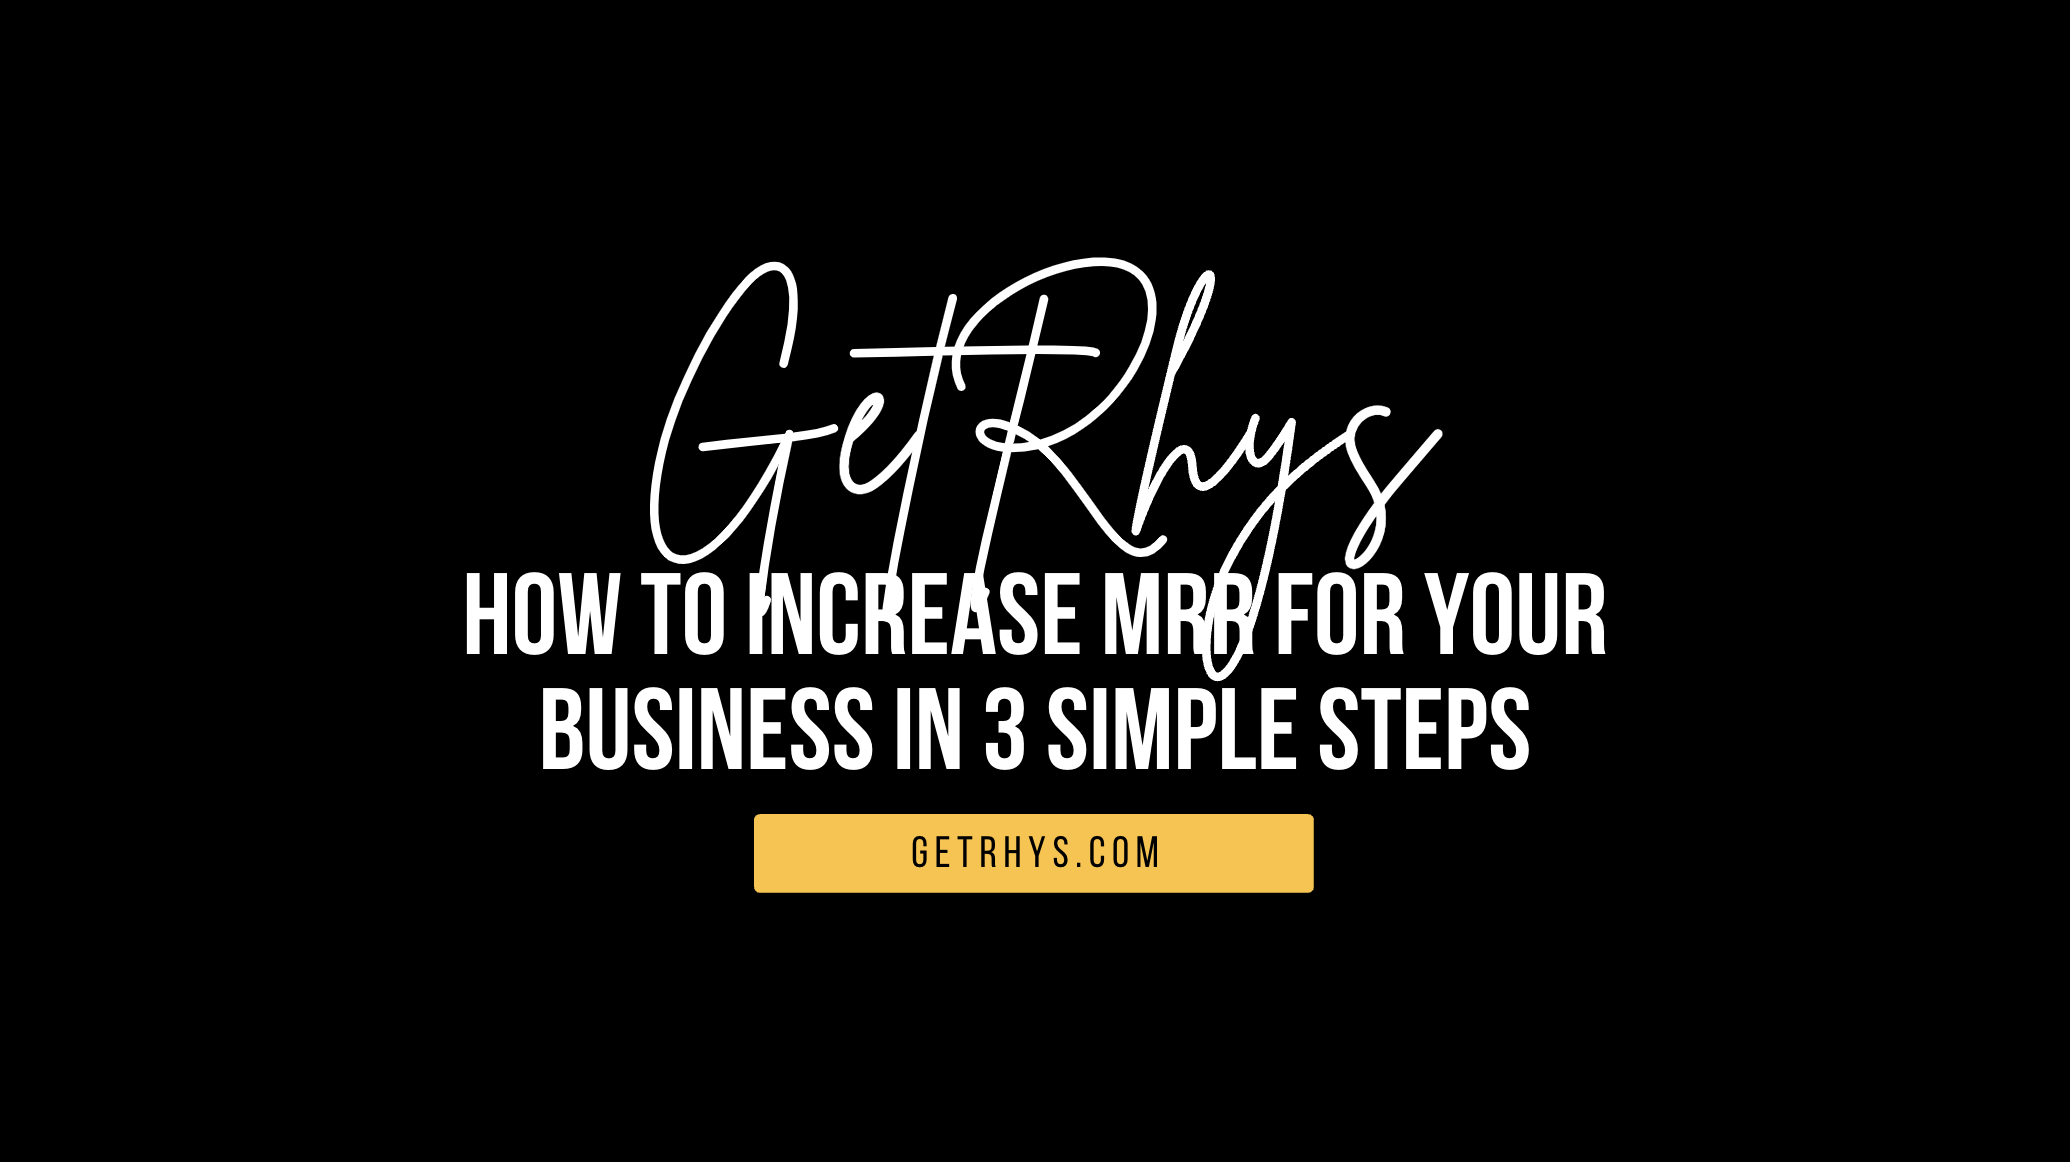 How to increase MRR for your business in 3 simple steps